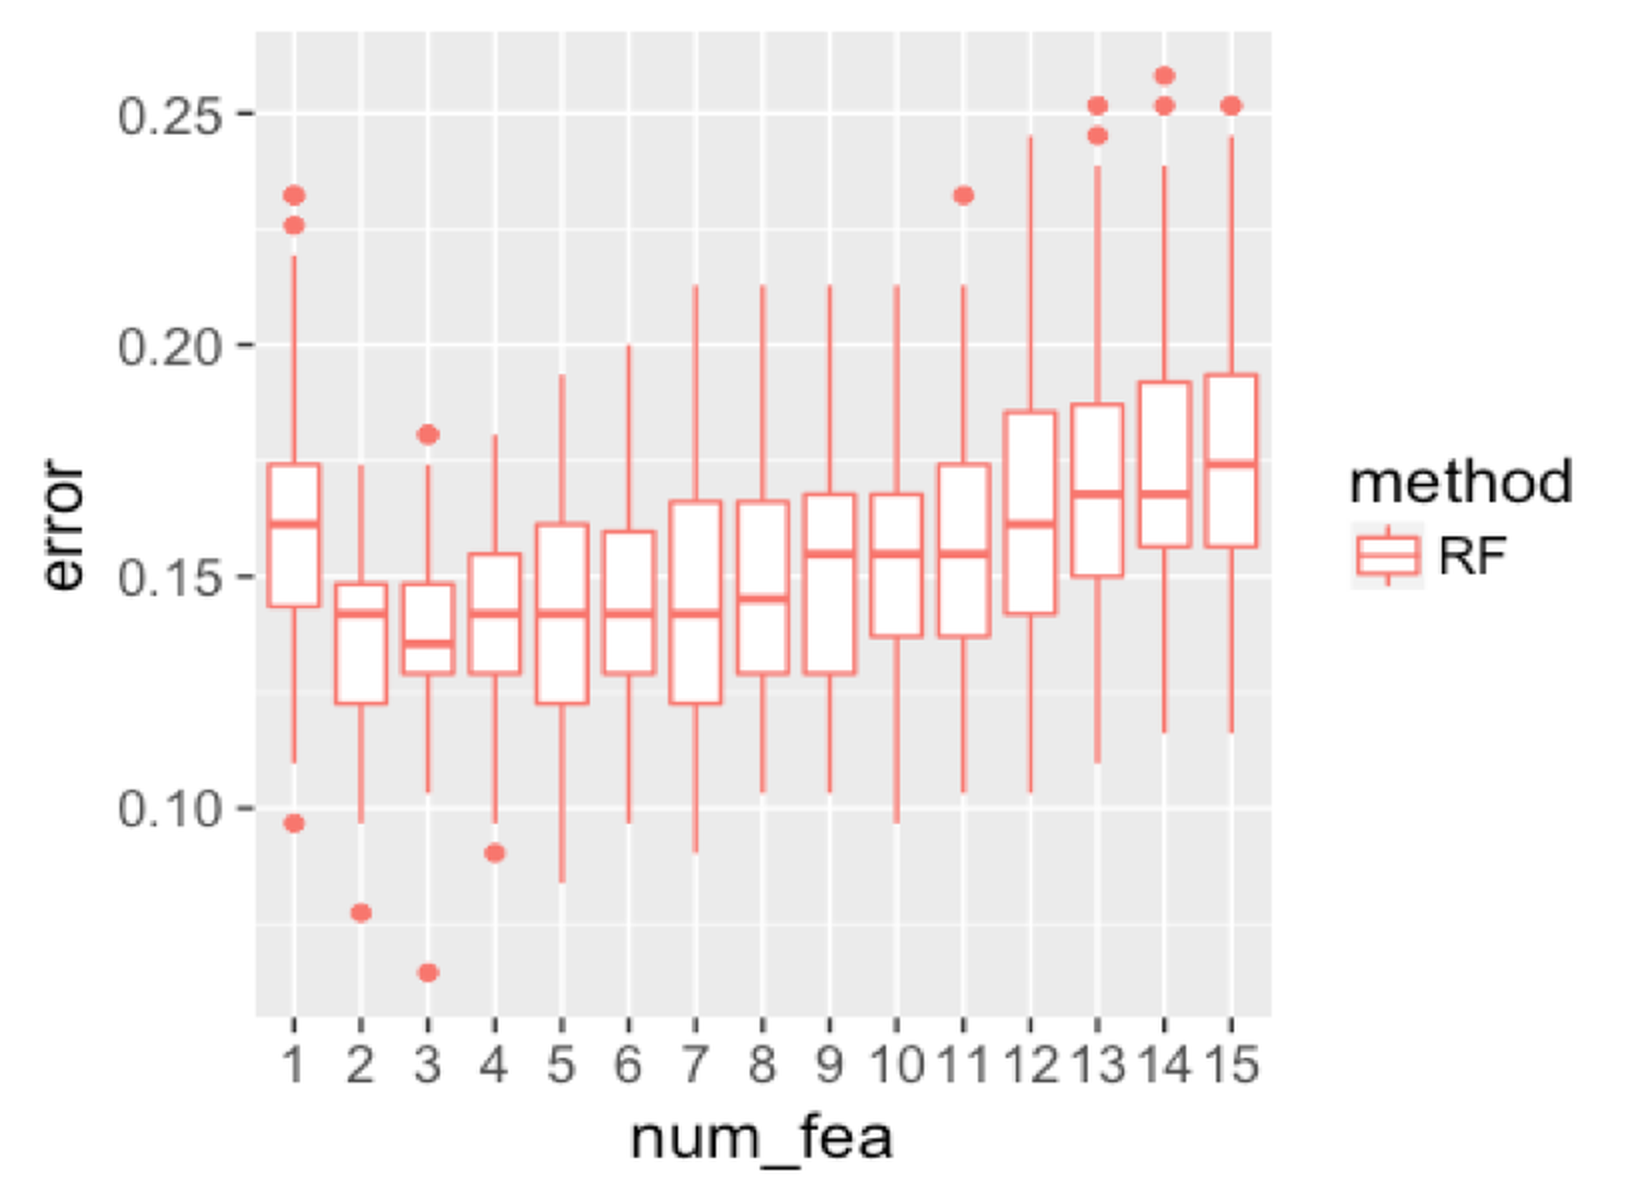  Boxplots of the classification error rates for random forest with a different number of features